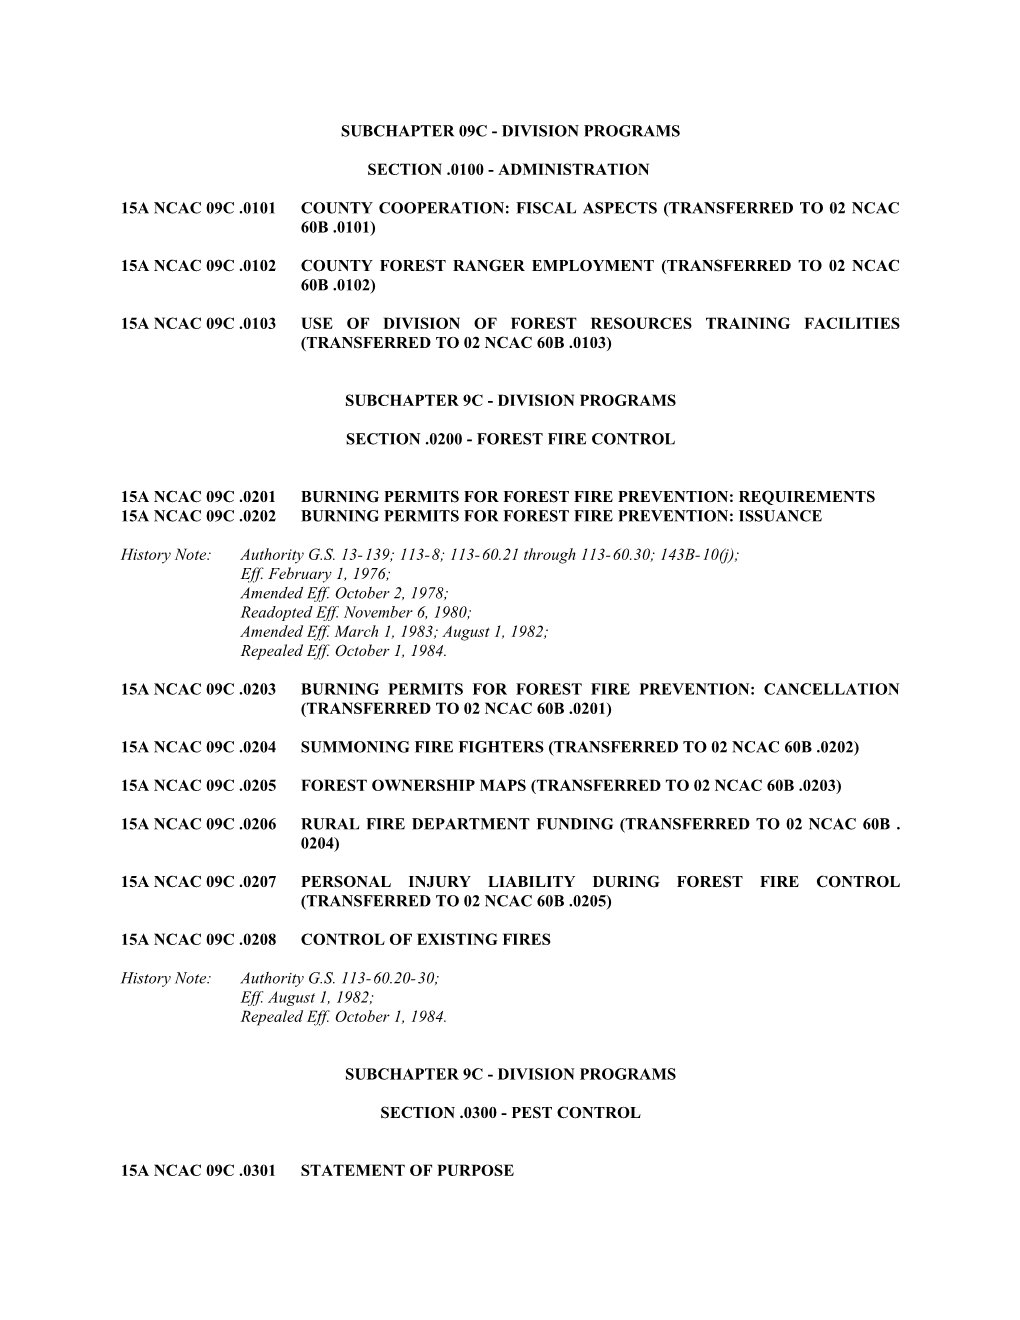 Subchapter 09C Division Programs